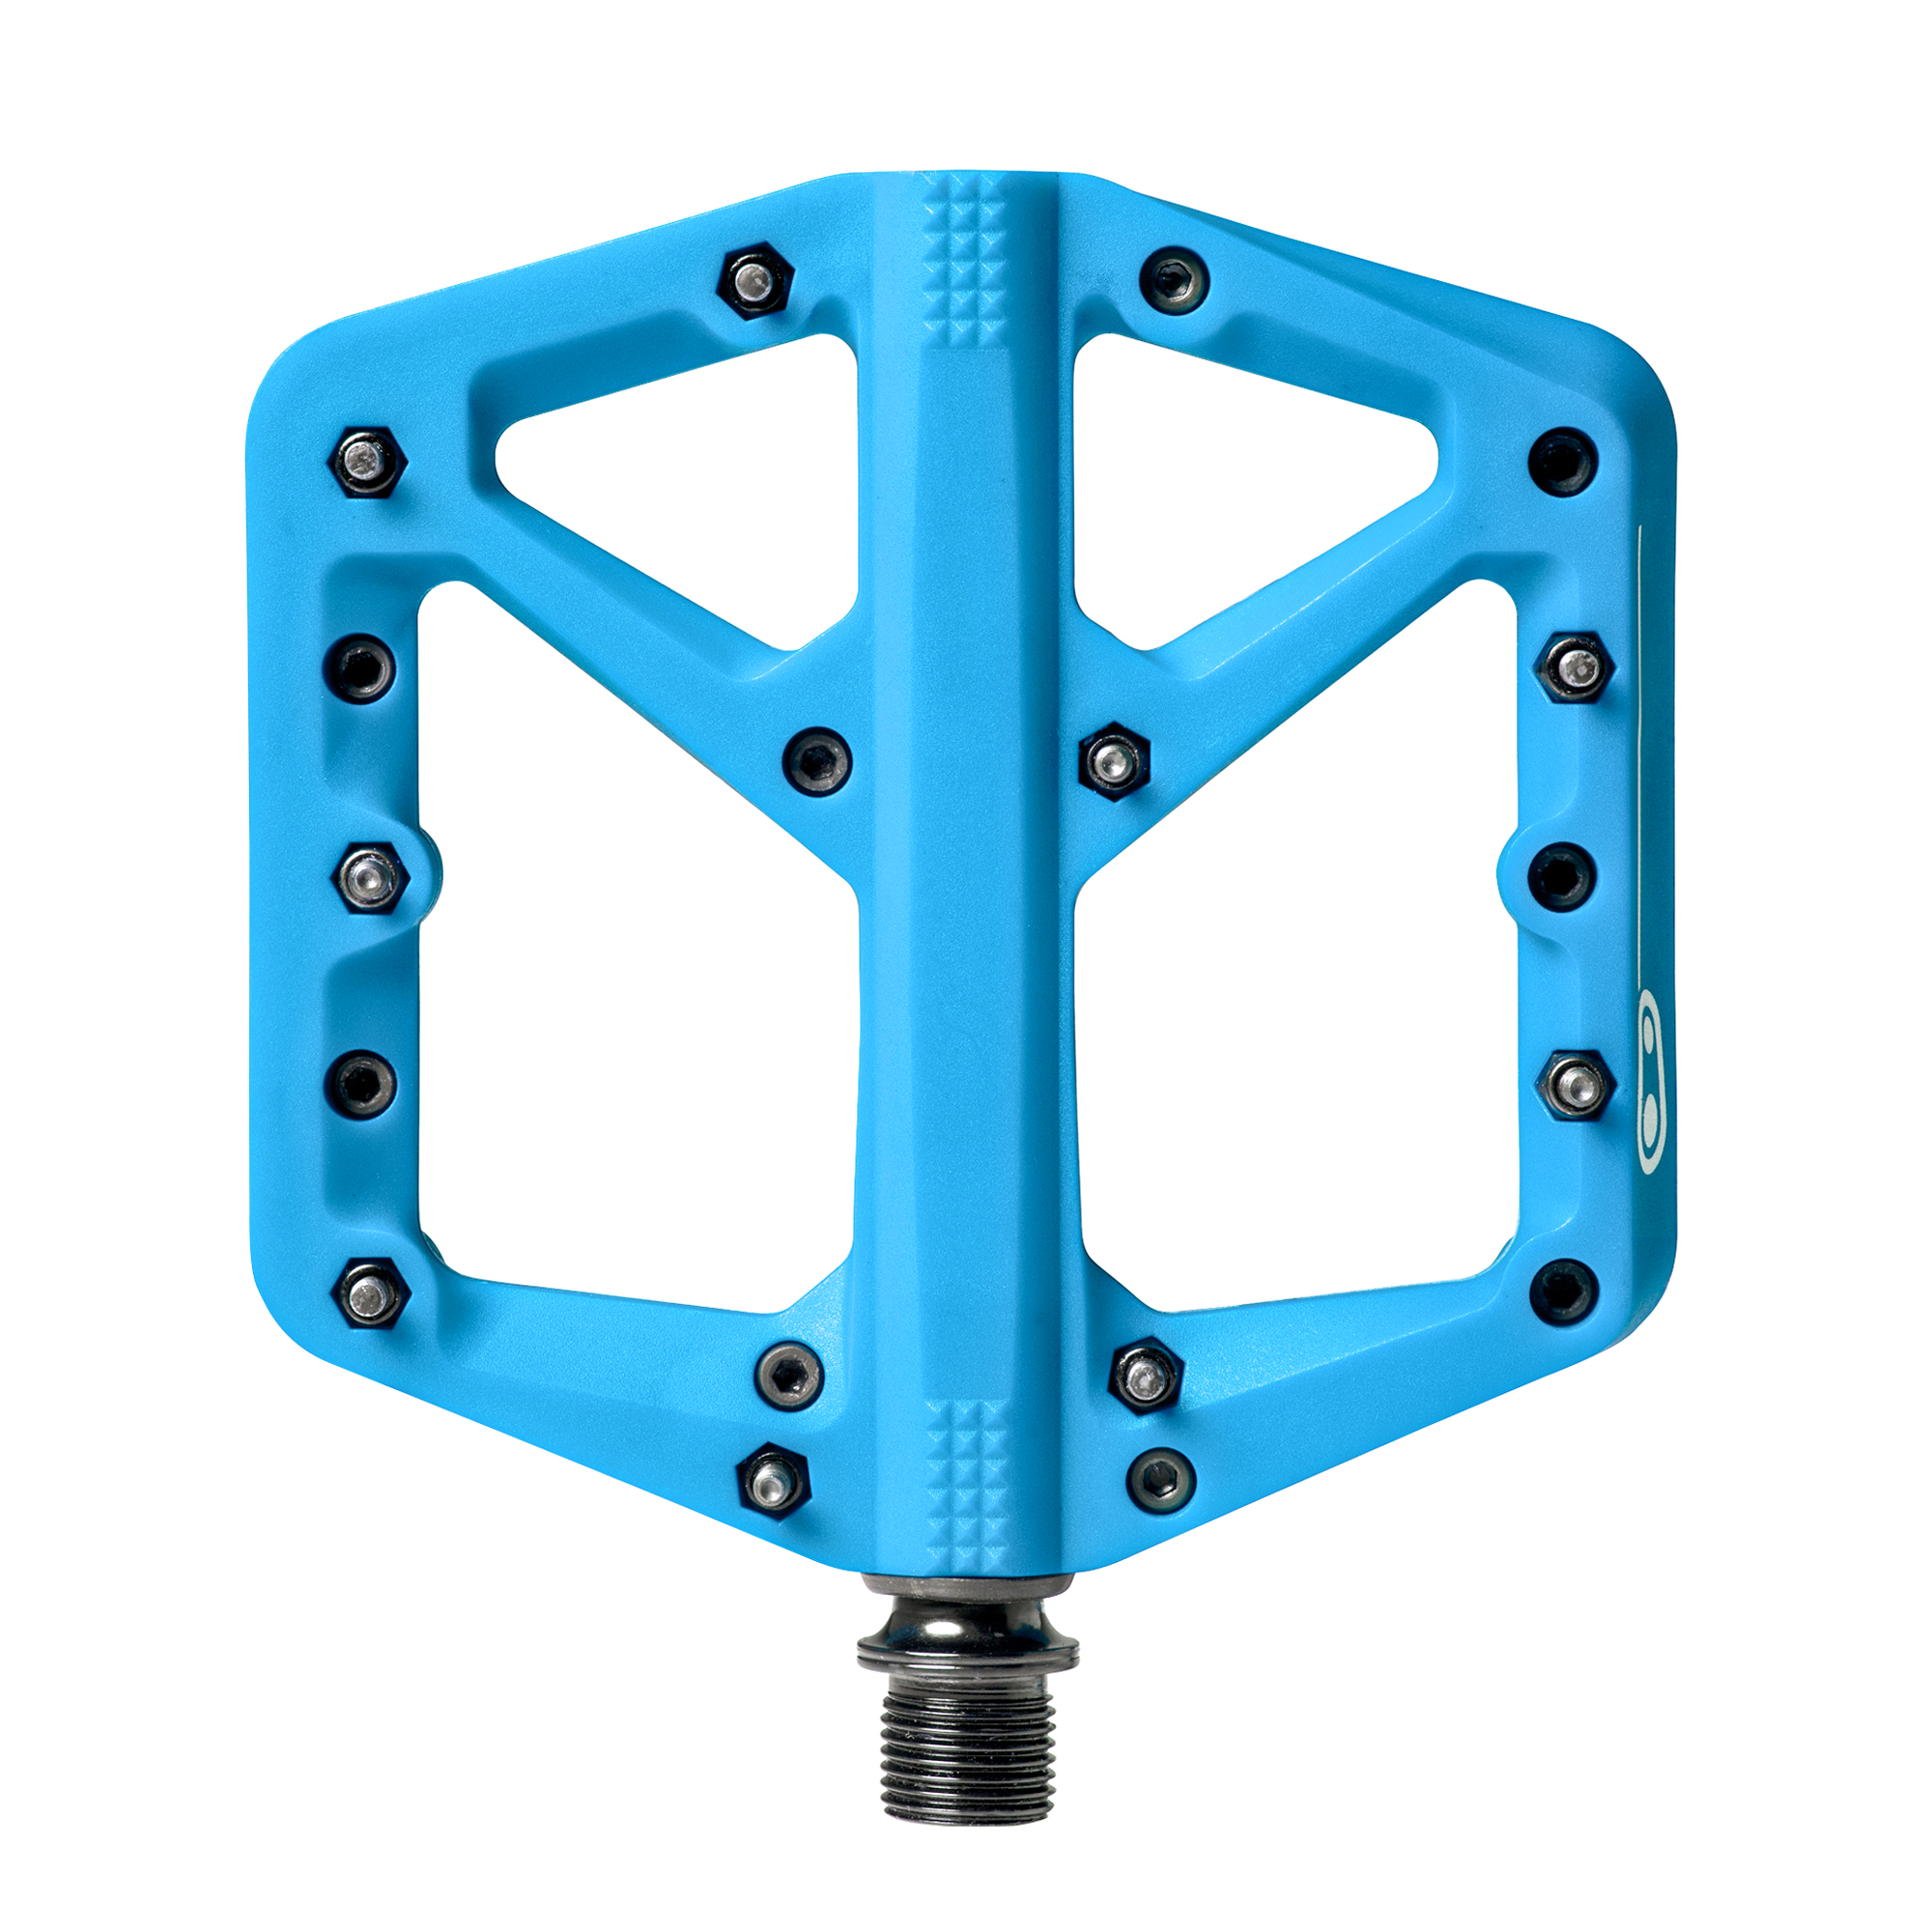 Pedales stamp 1 azul Crankbrothers